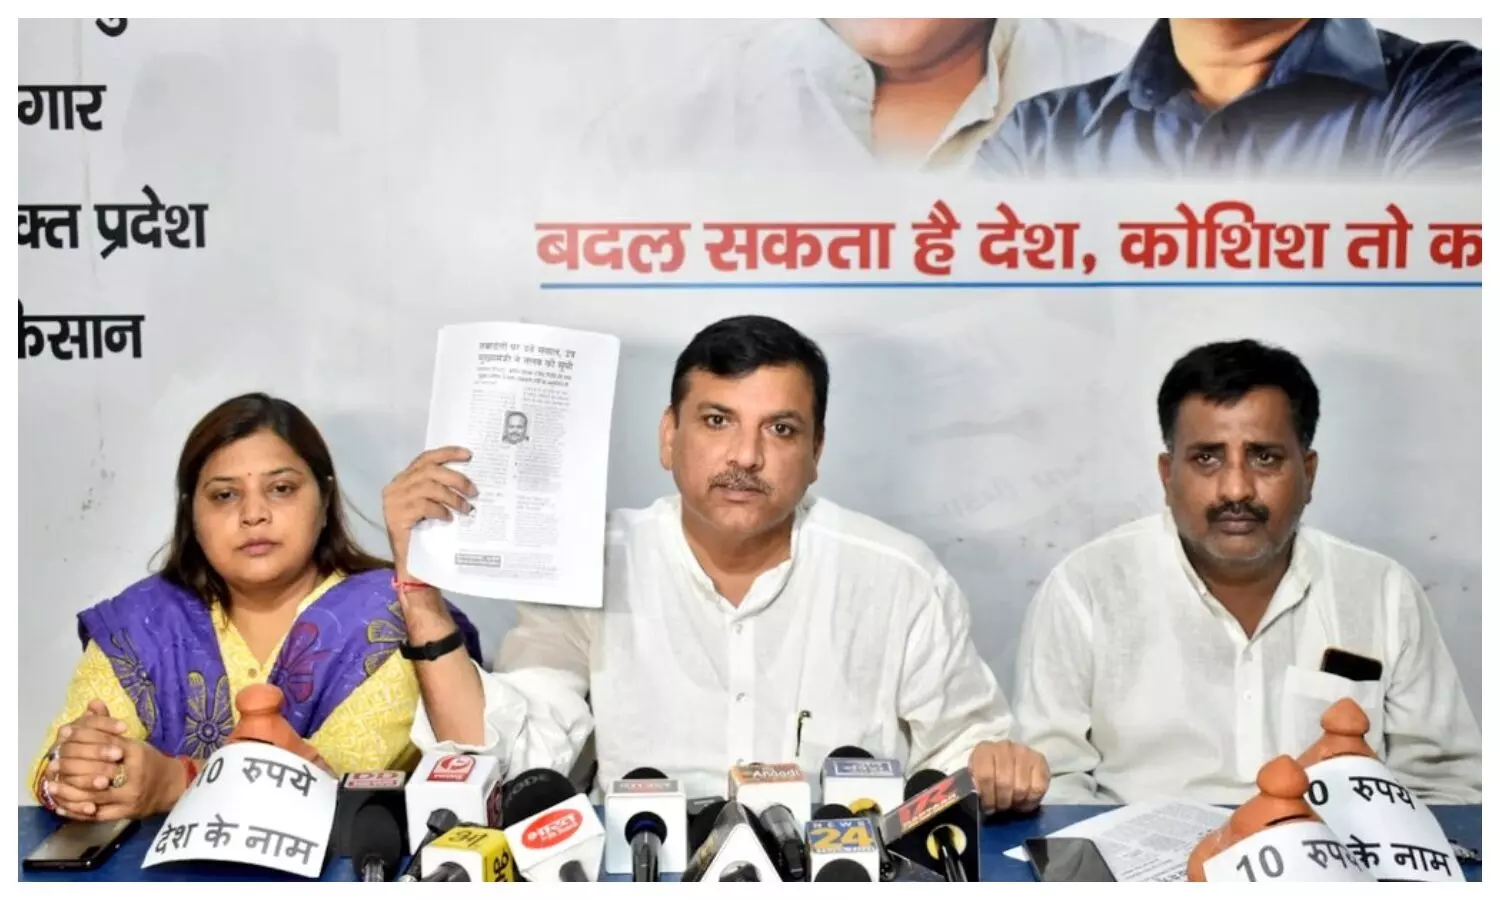 Sanjay Singh in a Press Conference